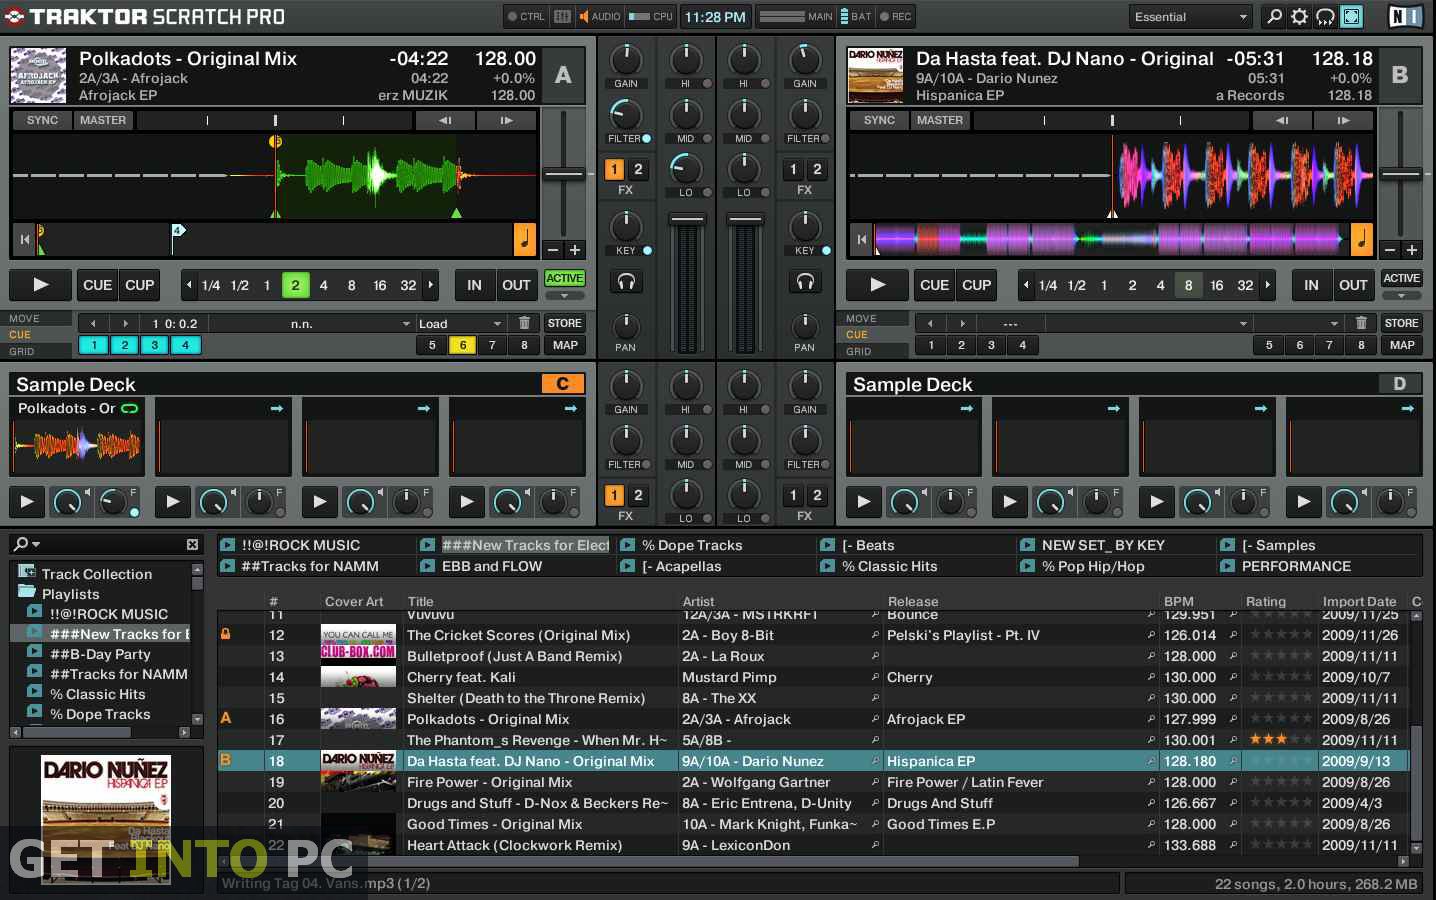 What is the latest version of traktor scratch pro 2 11 download